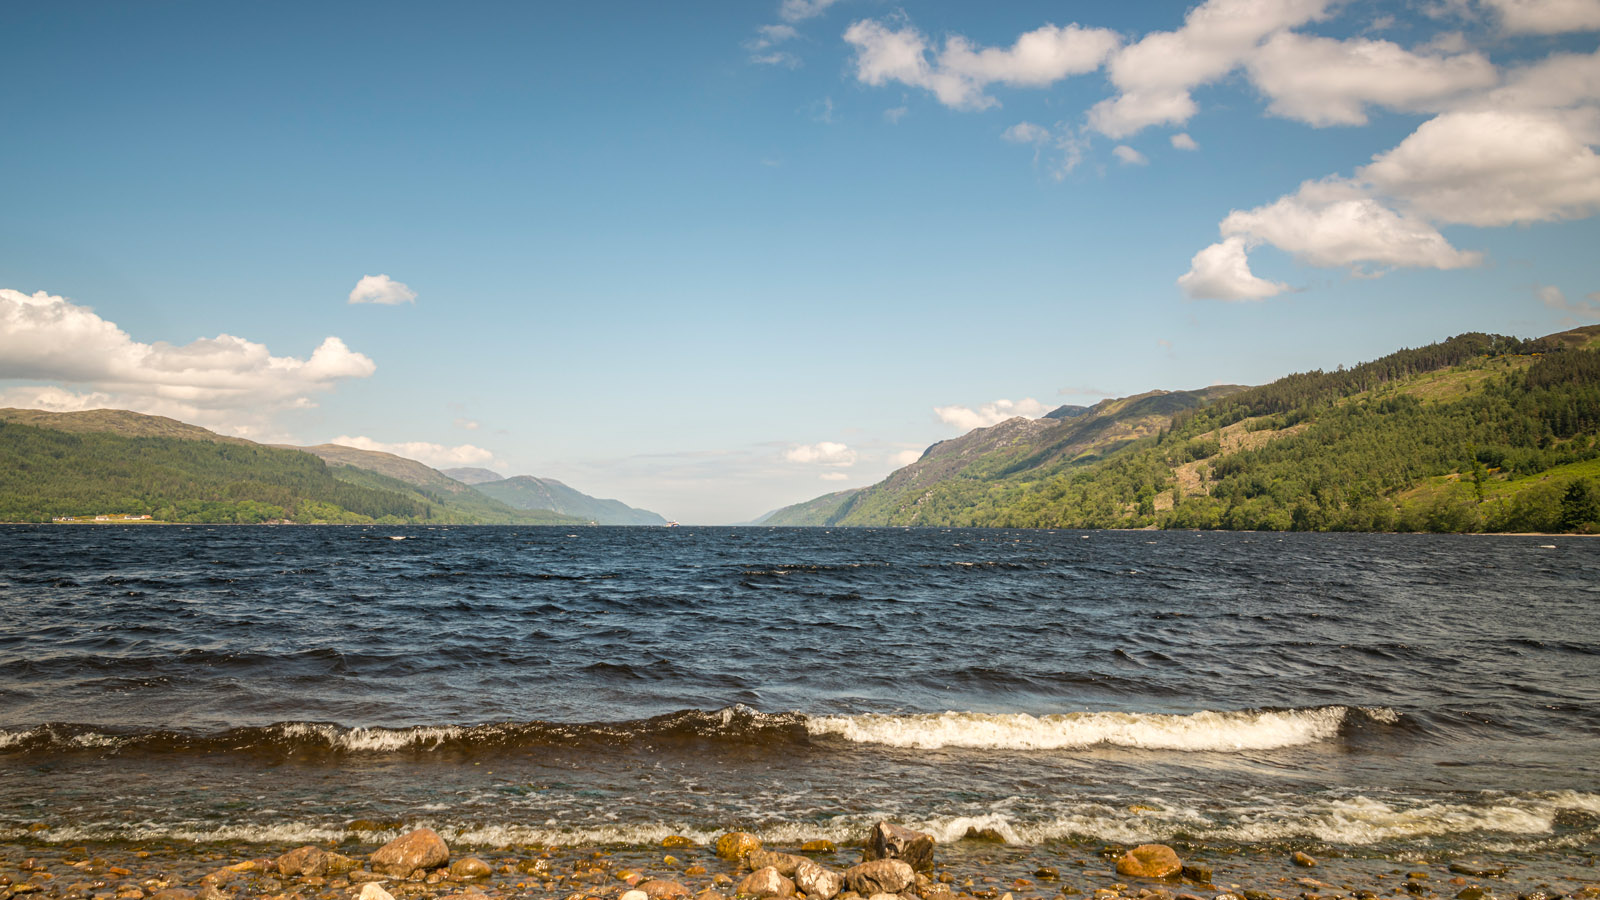 Could The Loch Ness Monster Come Be A Parallel Universe?